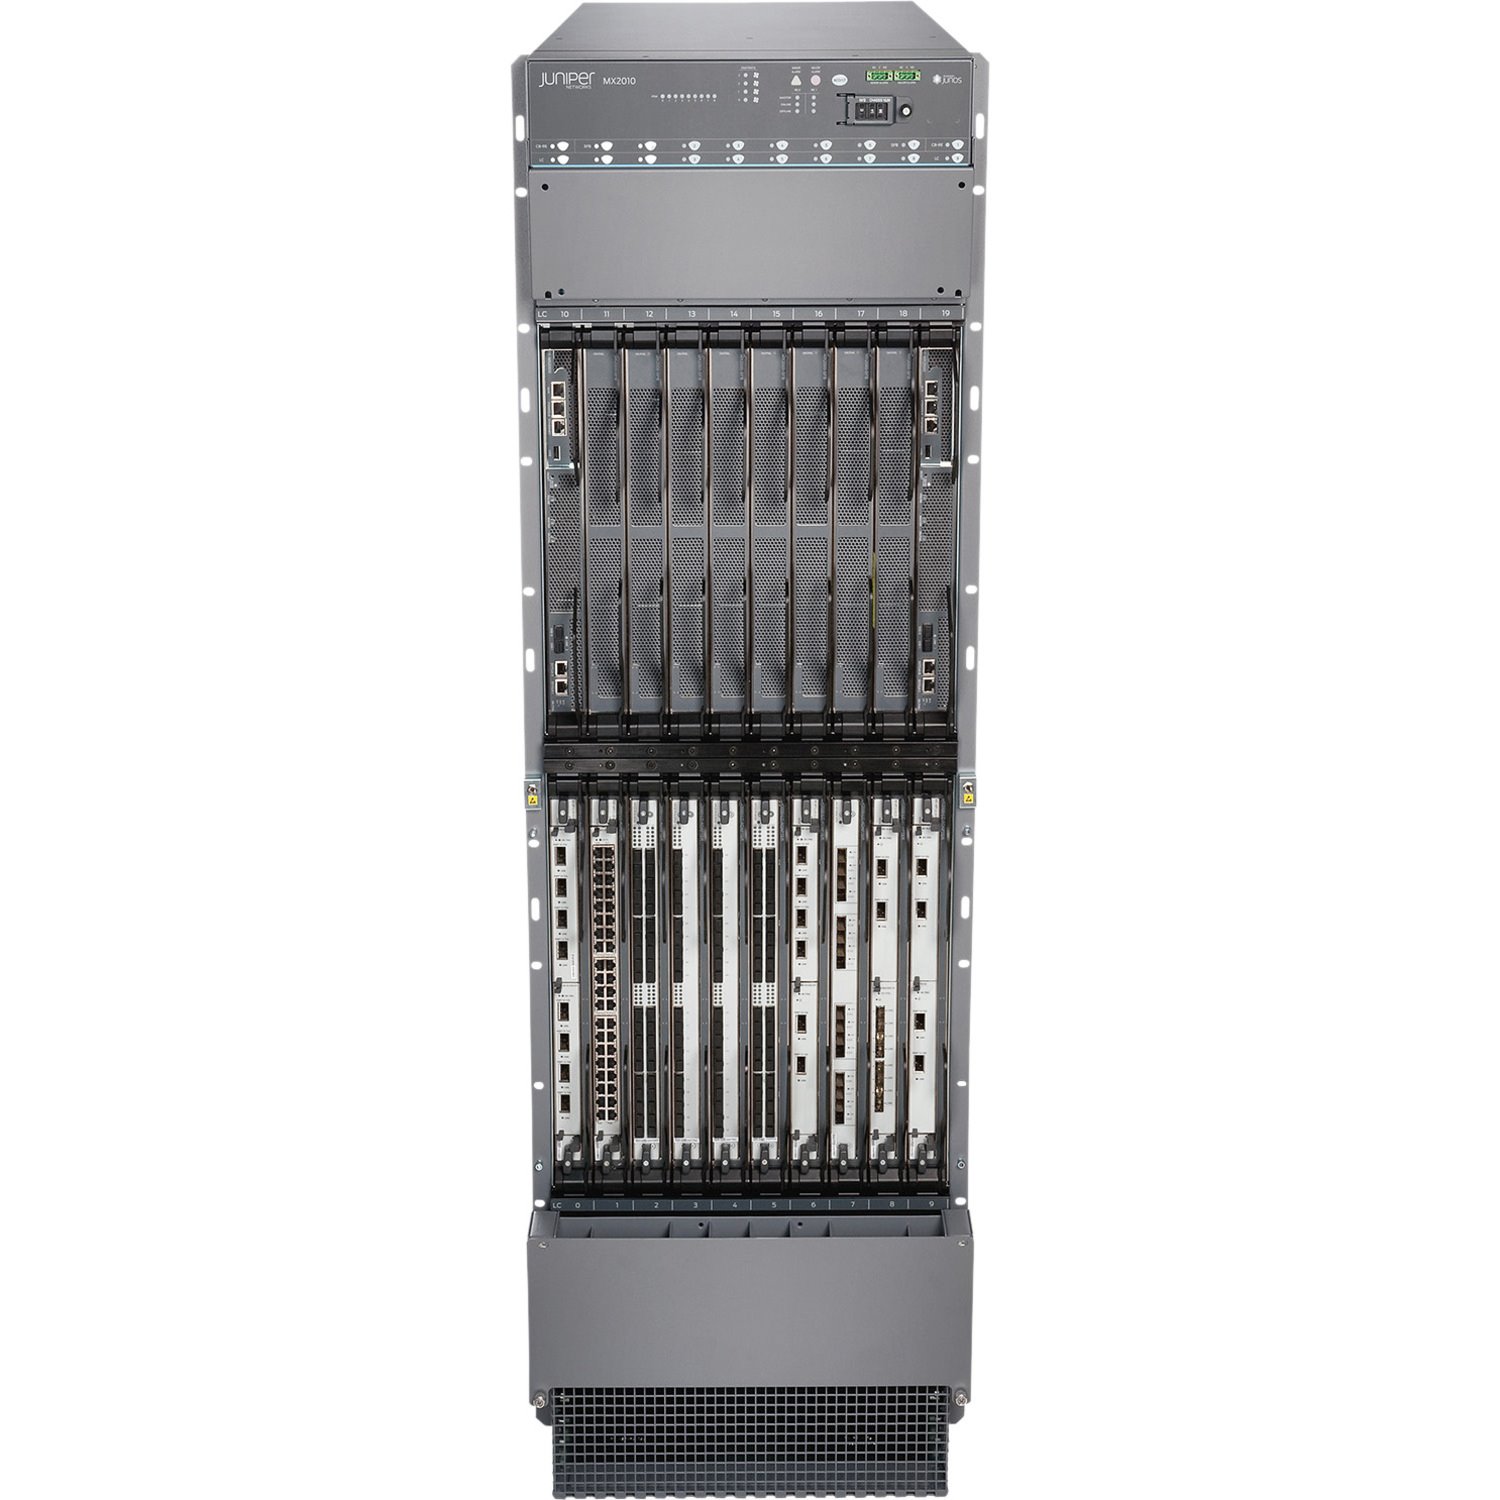 Juniper MX MX2010 Router Chassis